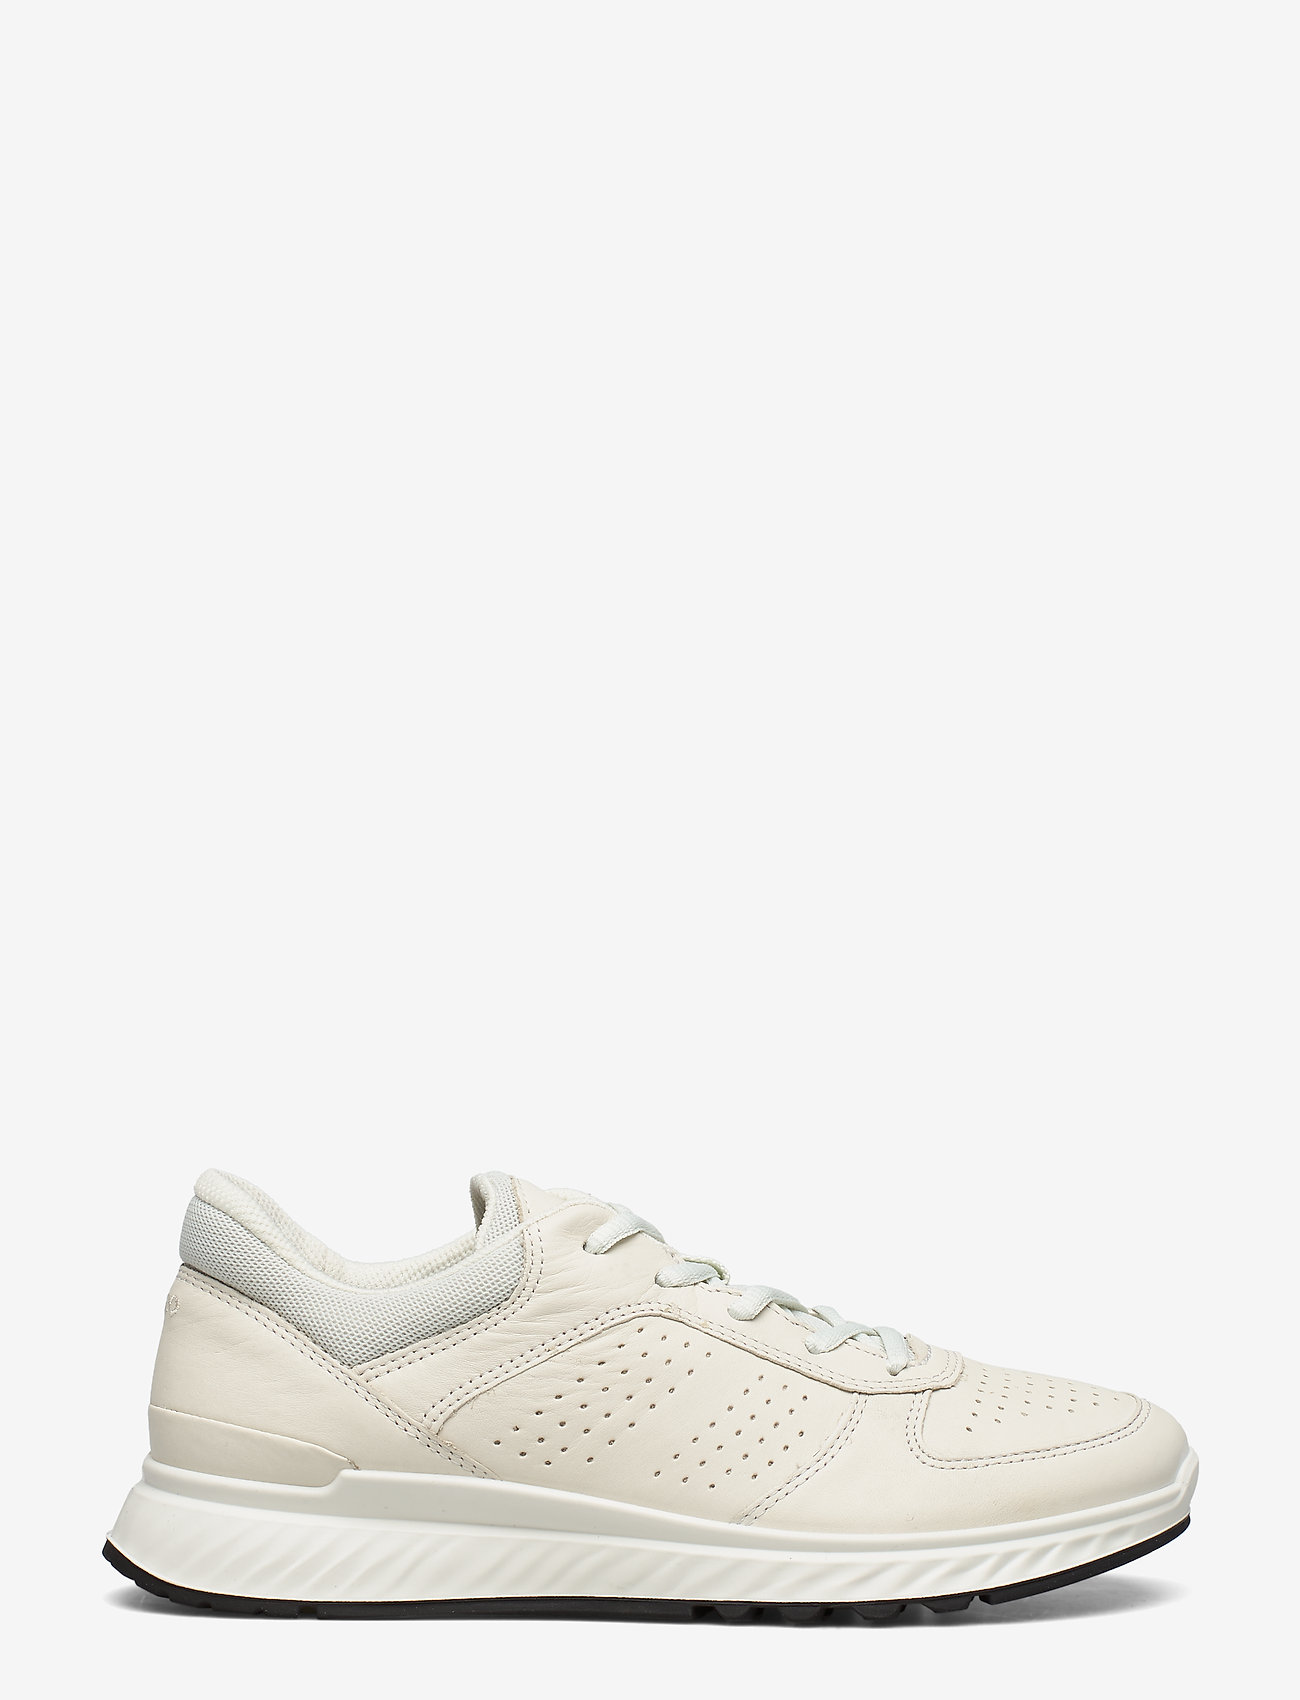 ECCO - EXOSTRIDE - low top sneakers - shadow white - 1